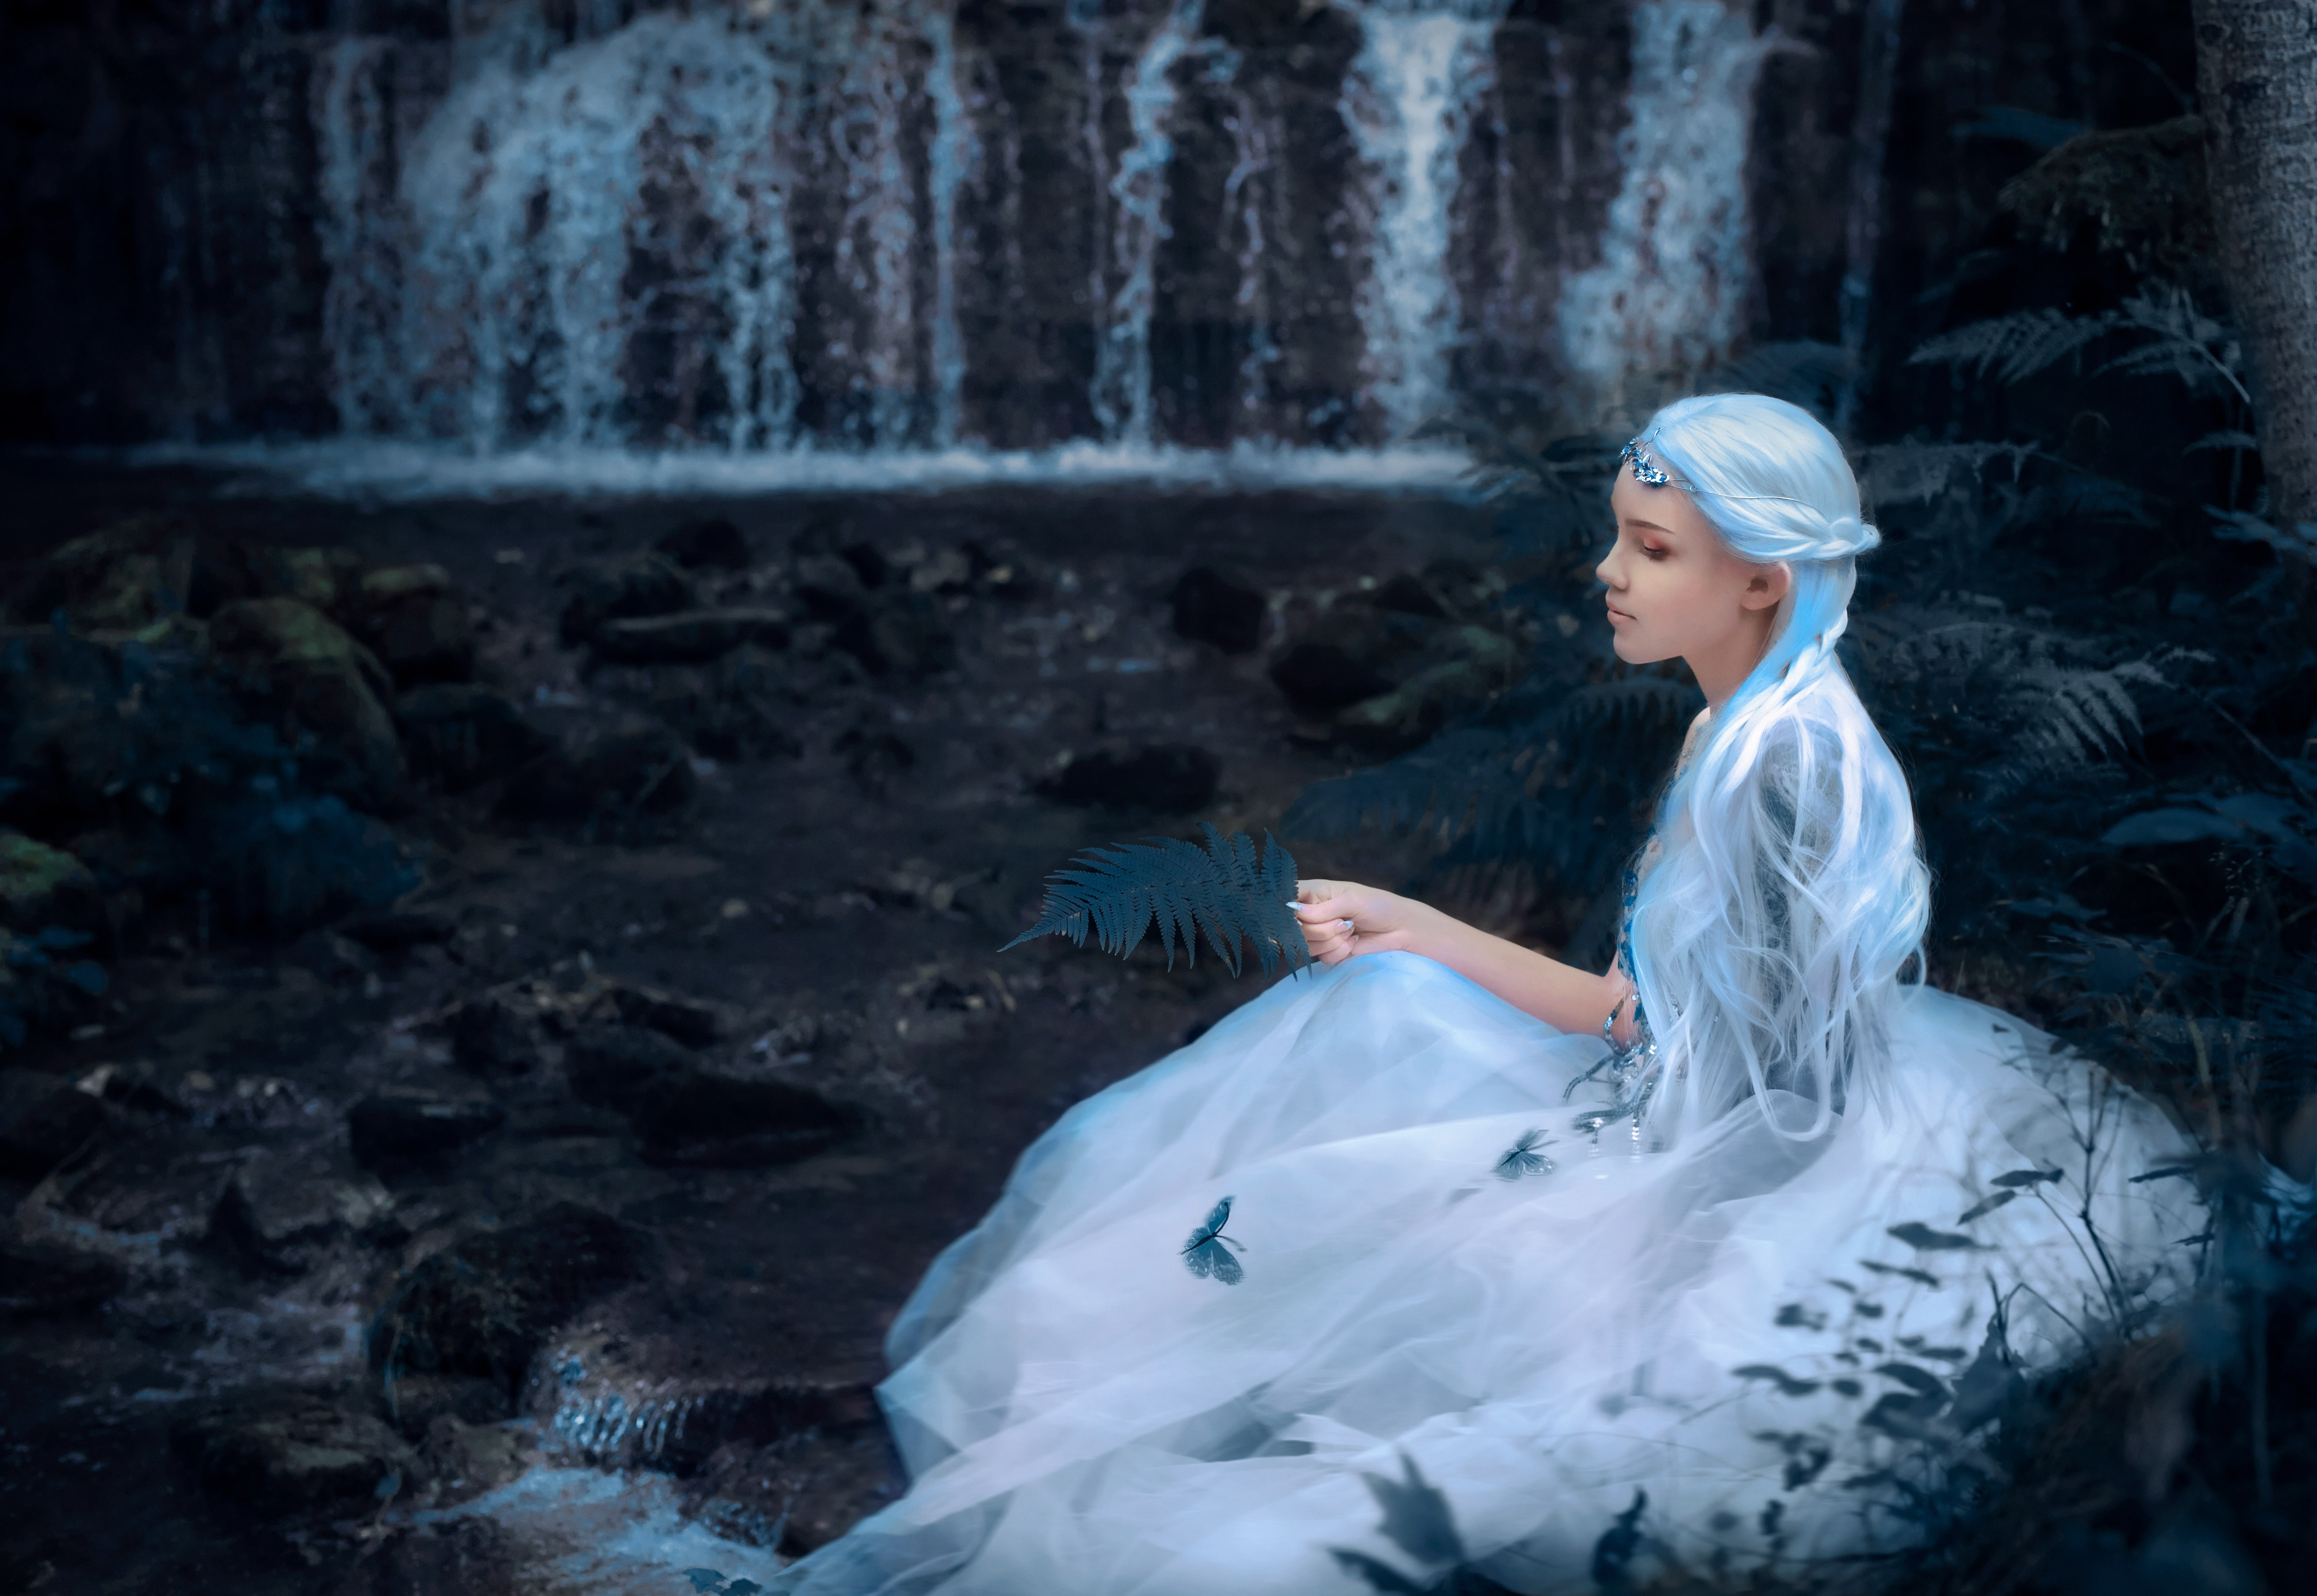 Beautiful portrait of a mysterious ethereal Elf princess sitting